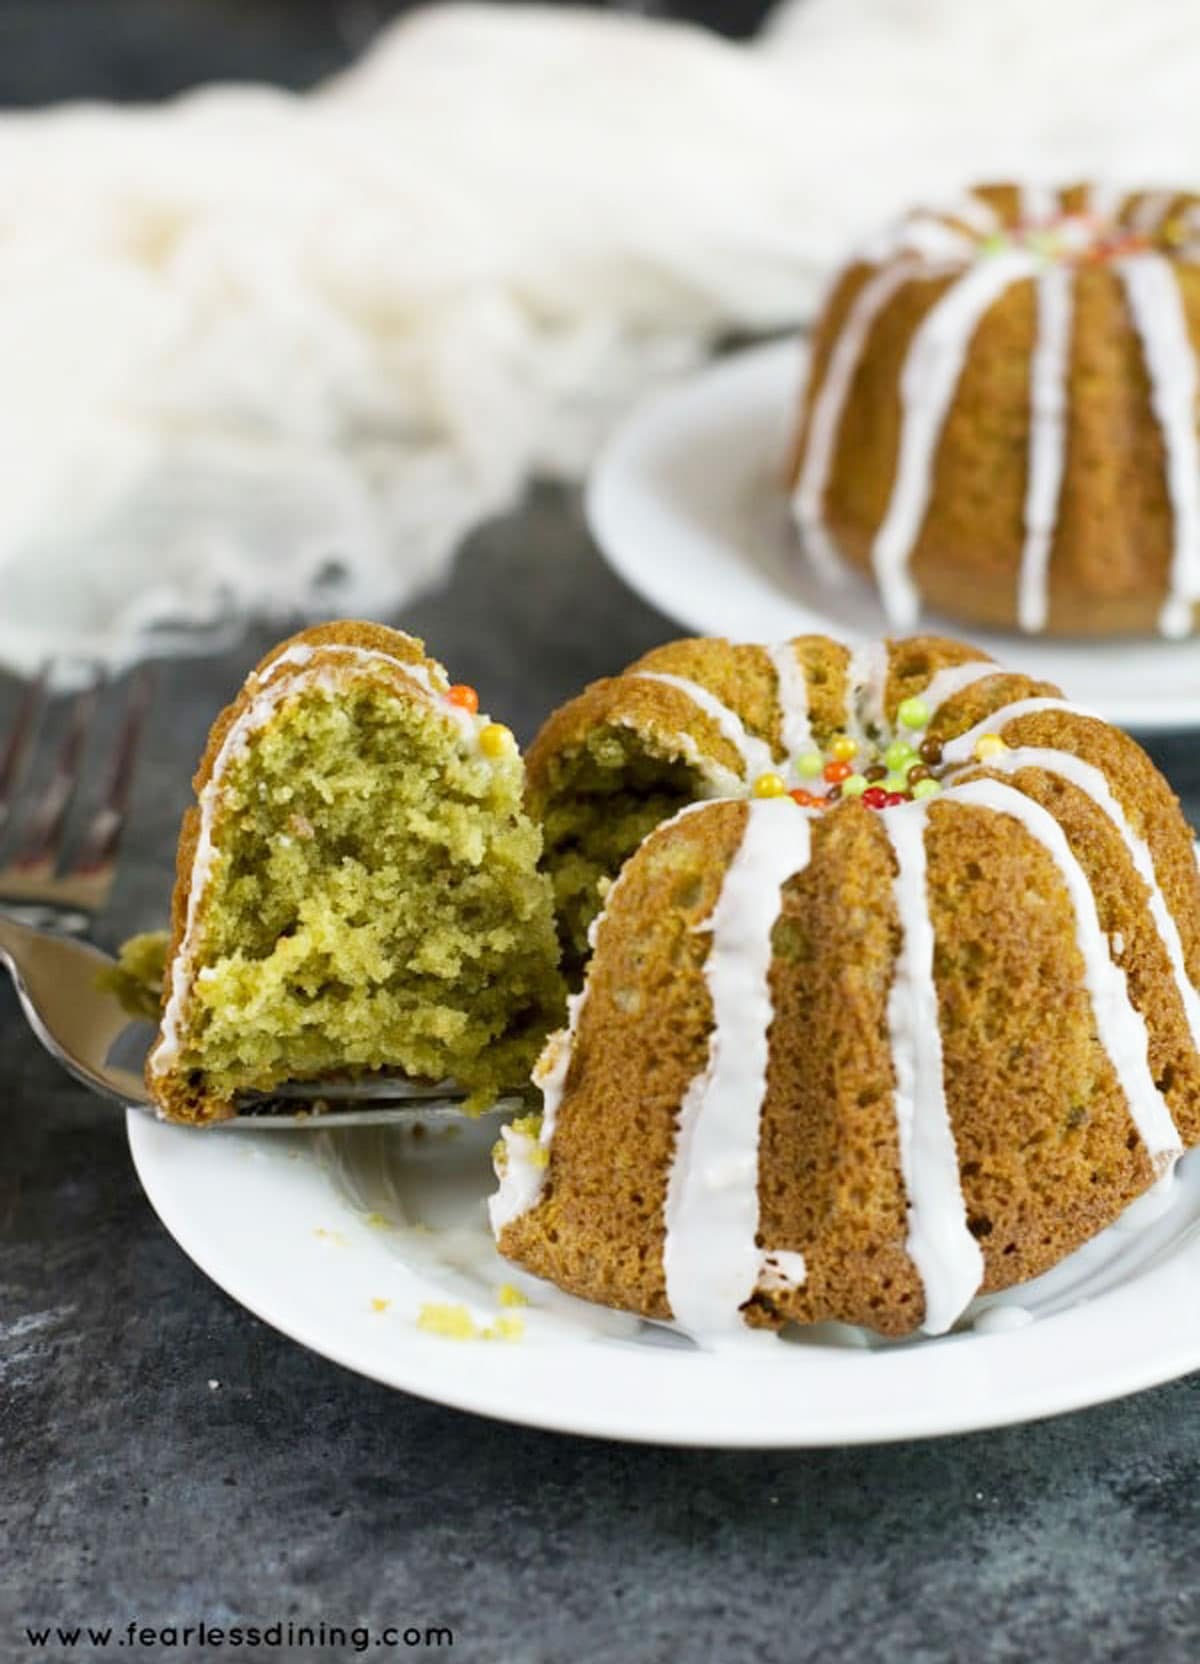 S slice of matcha bundt cake being cut from the main cake.